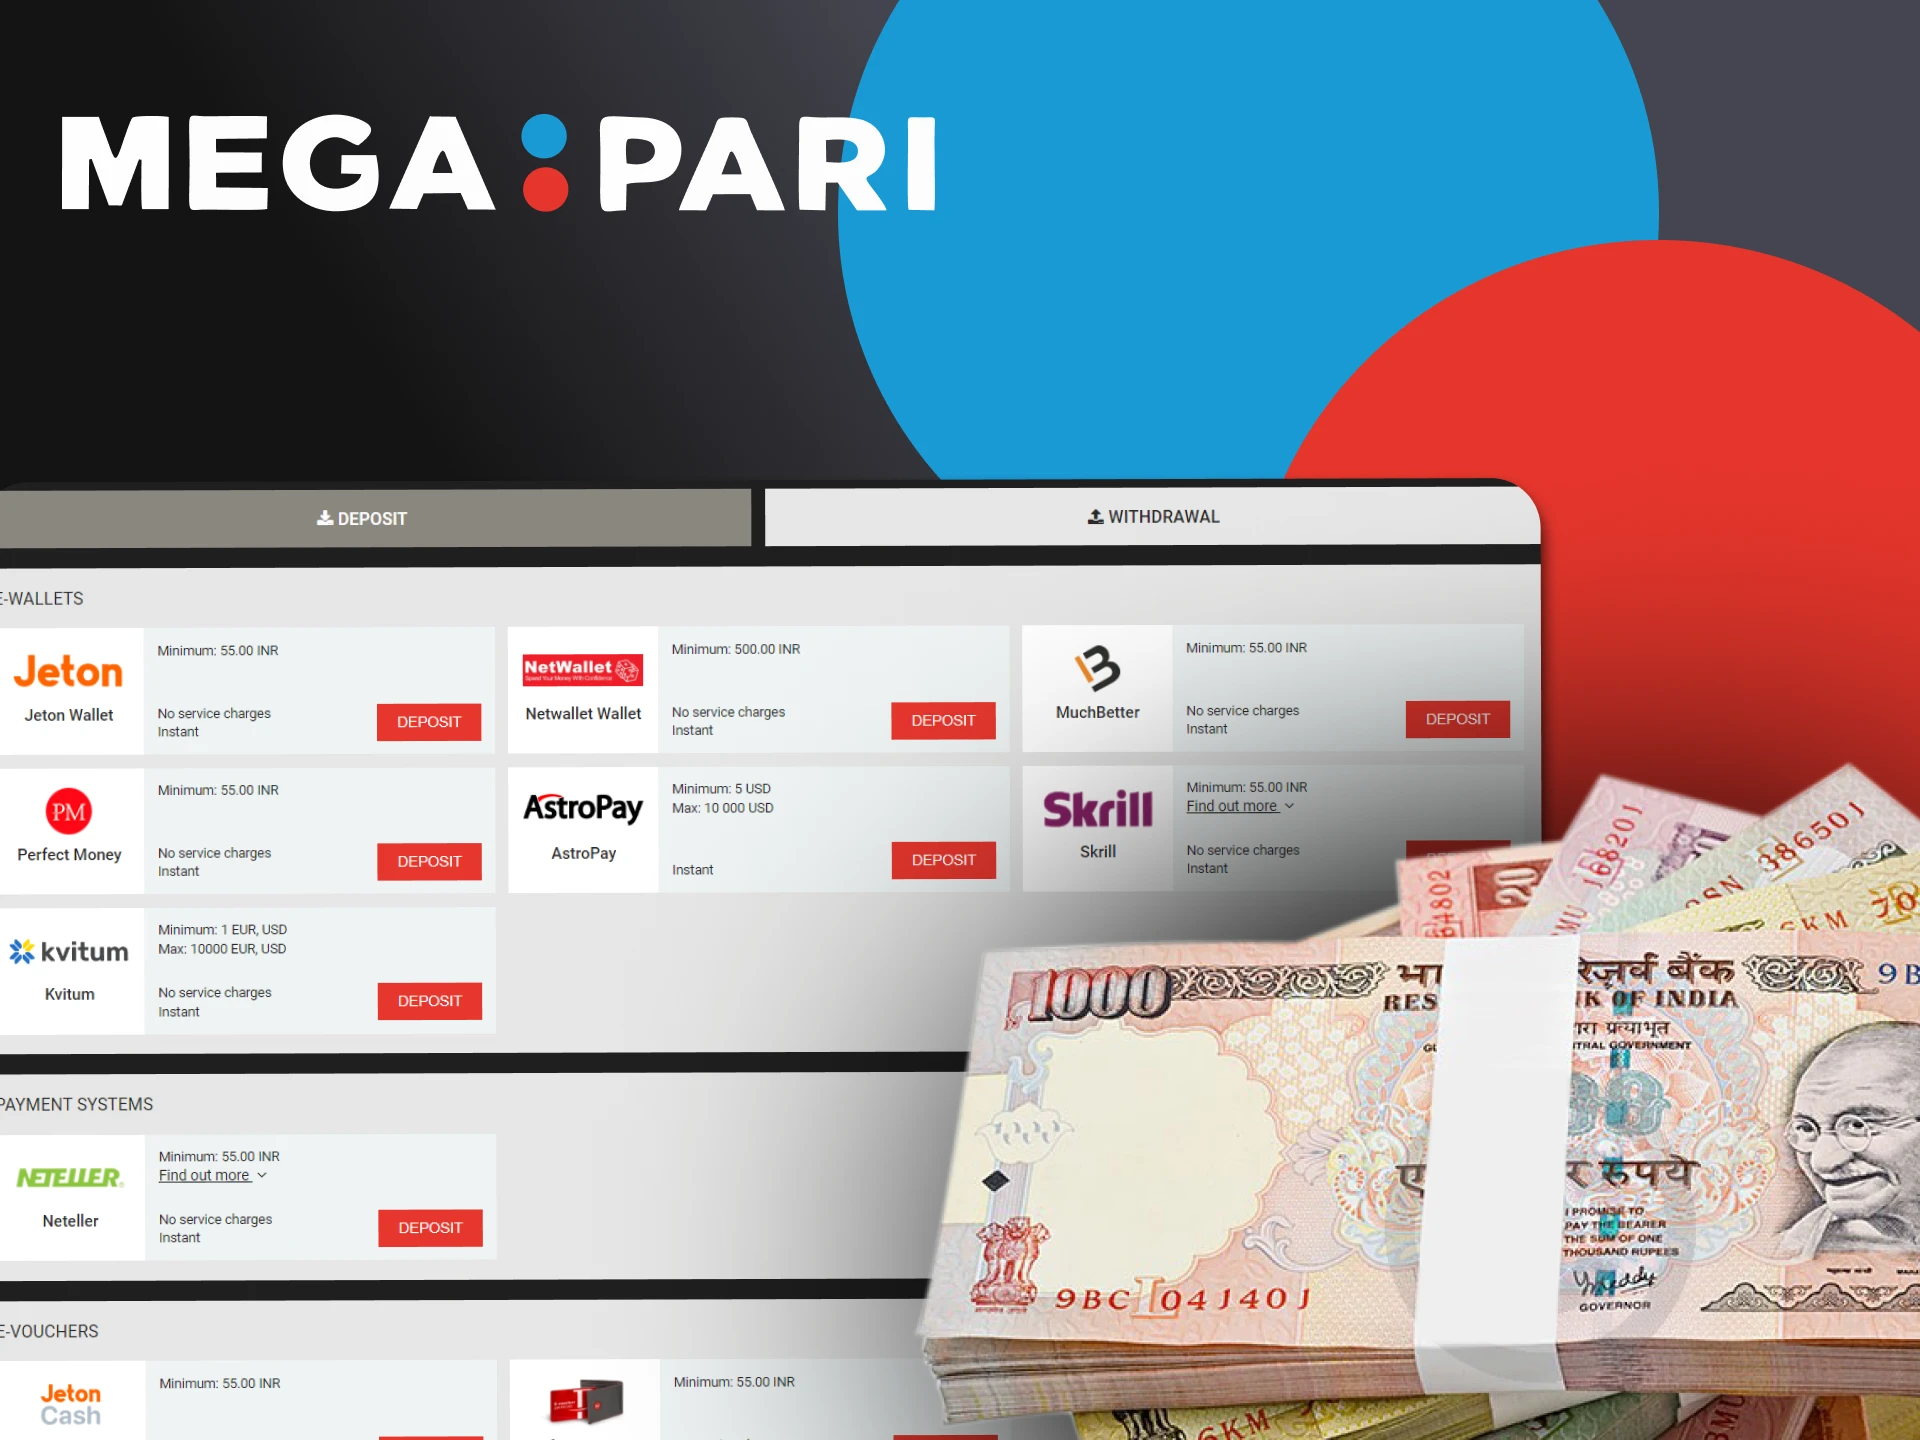 There are many ways to make transactions for virtual sports betting on Megapari.